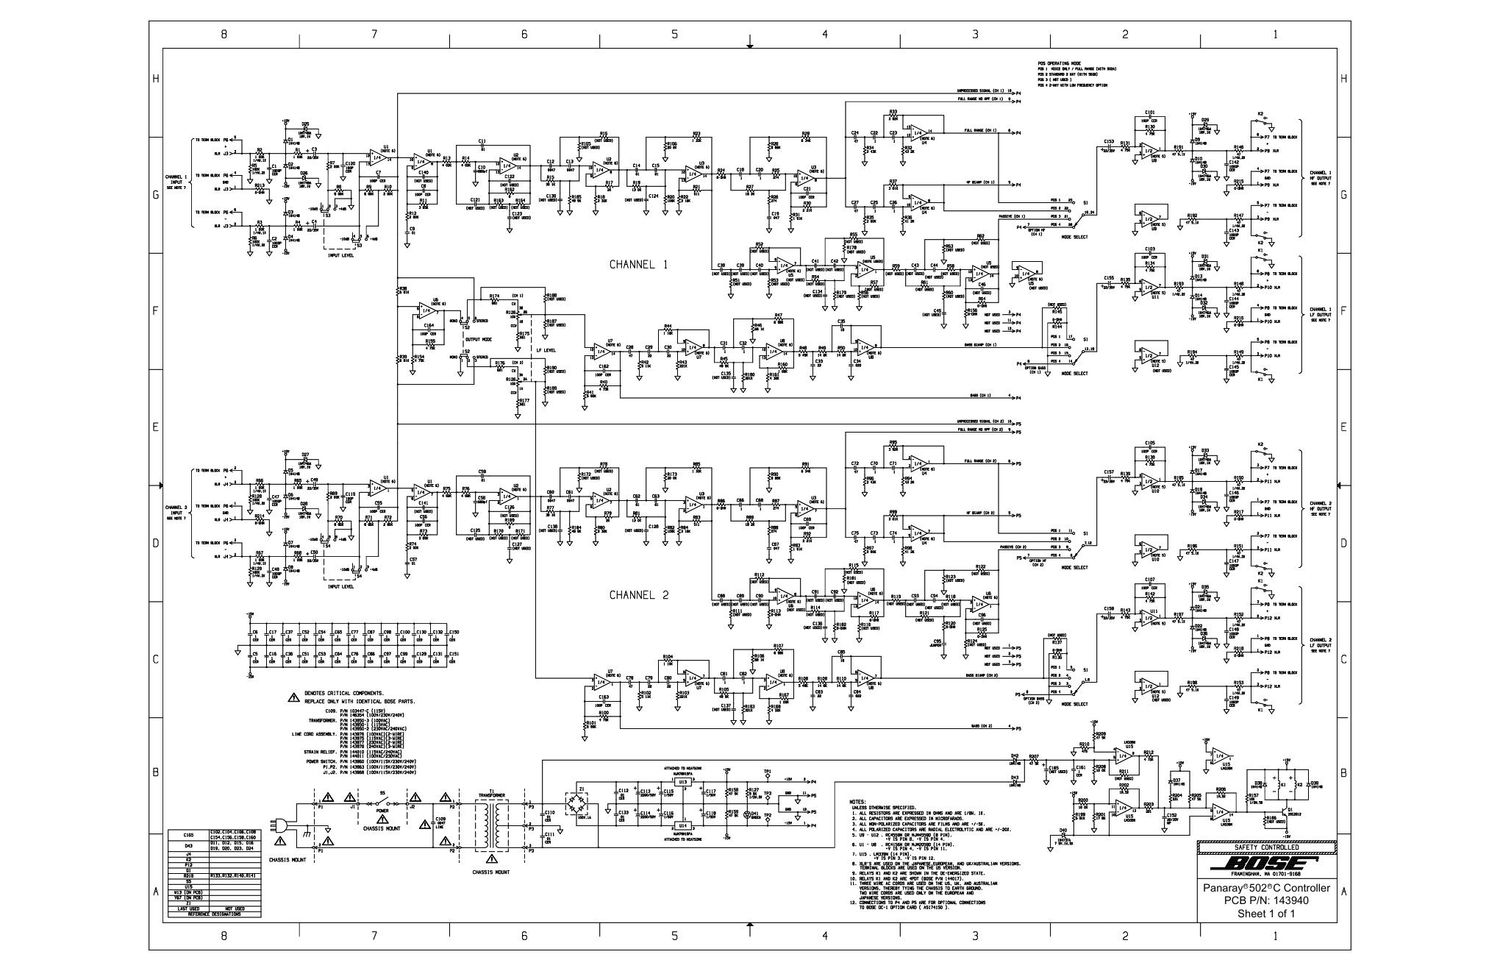 bose 502 c schematic shbose t1of1